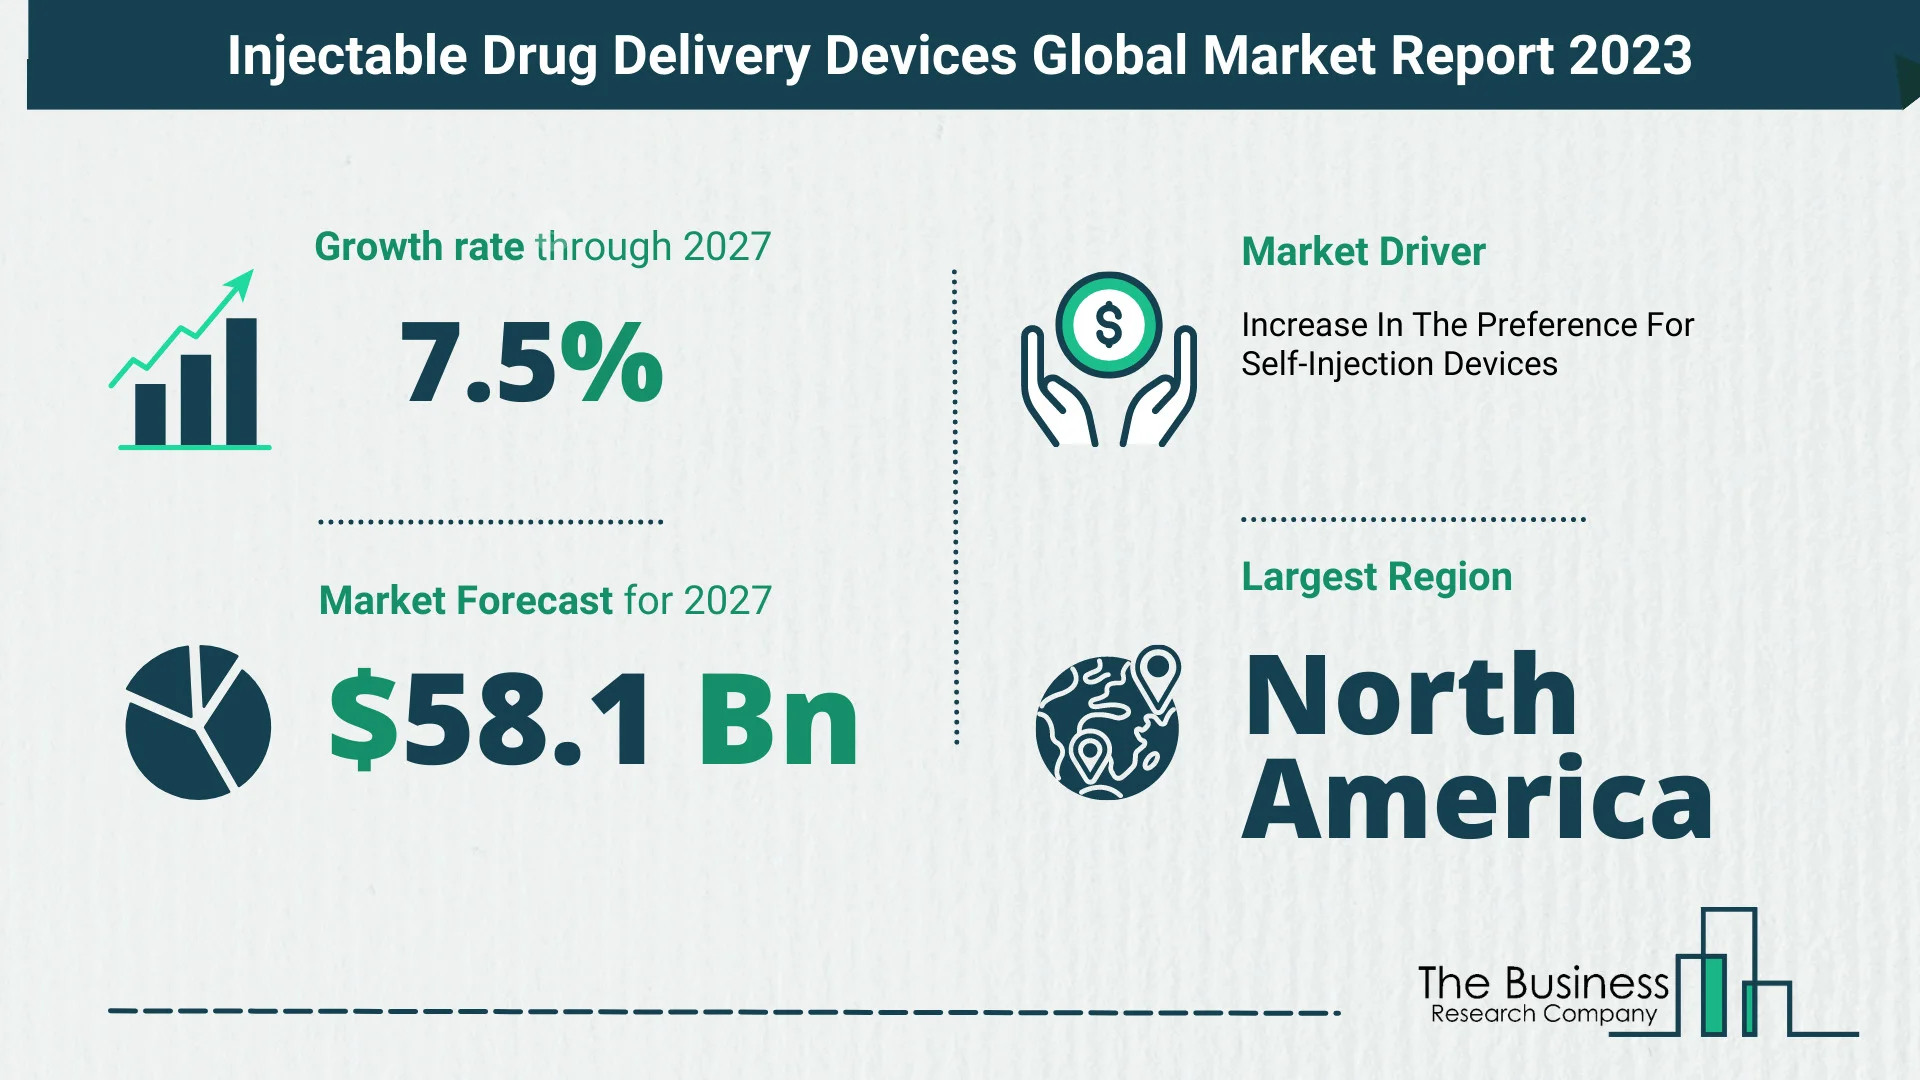 How Will The Injectable Drug Delivery Devices Market Size Grow In The Coming Years?